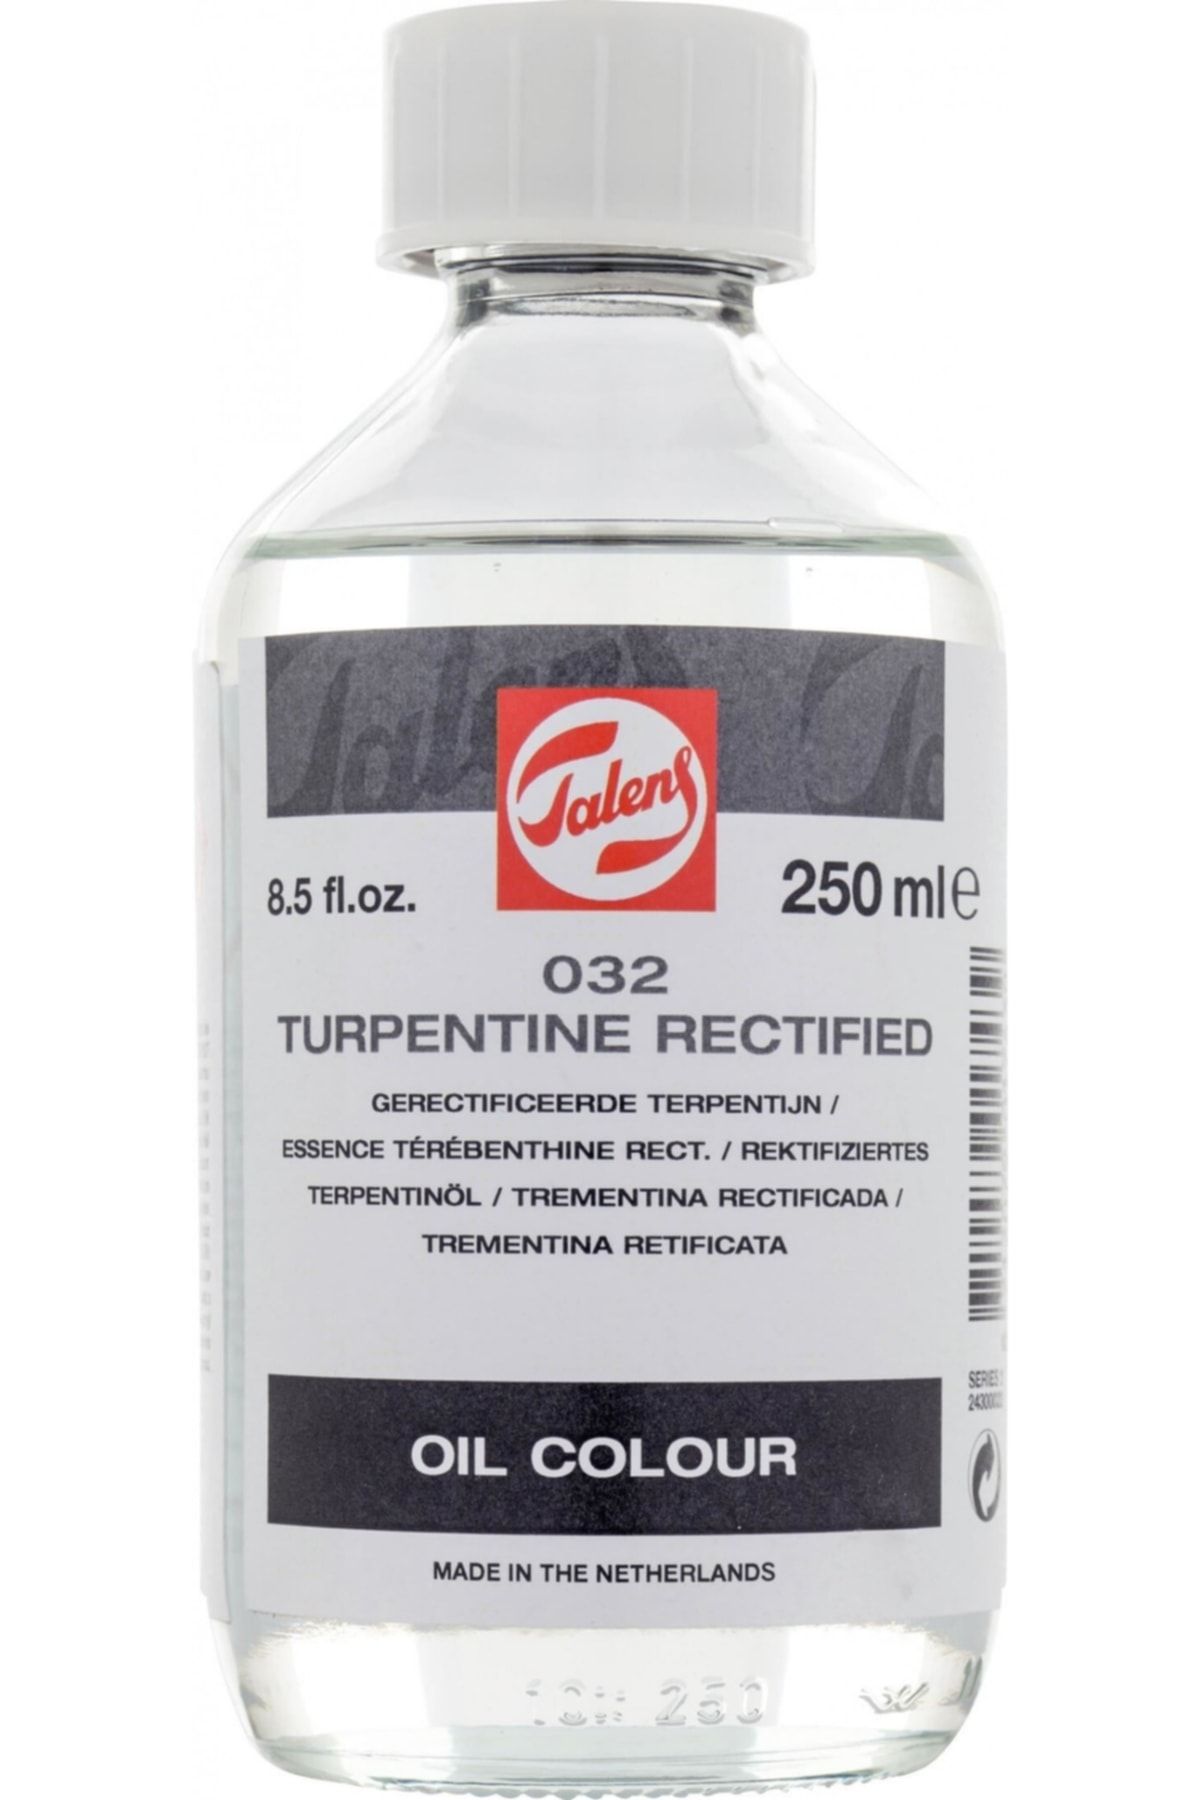 Talens Rectified Turpentine 032 250ml